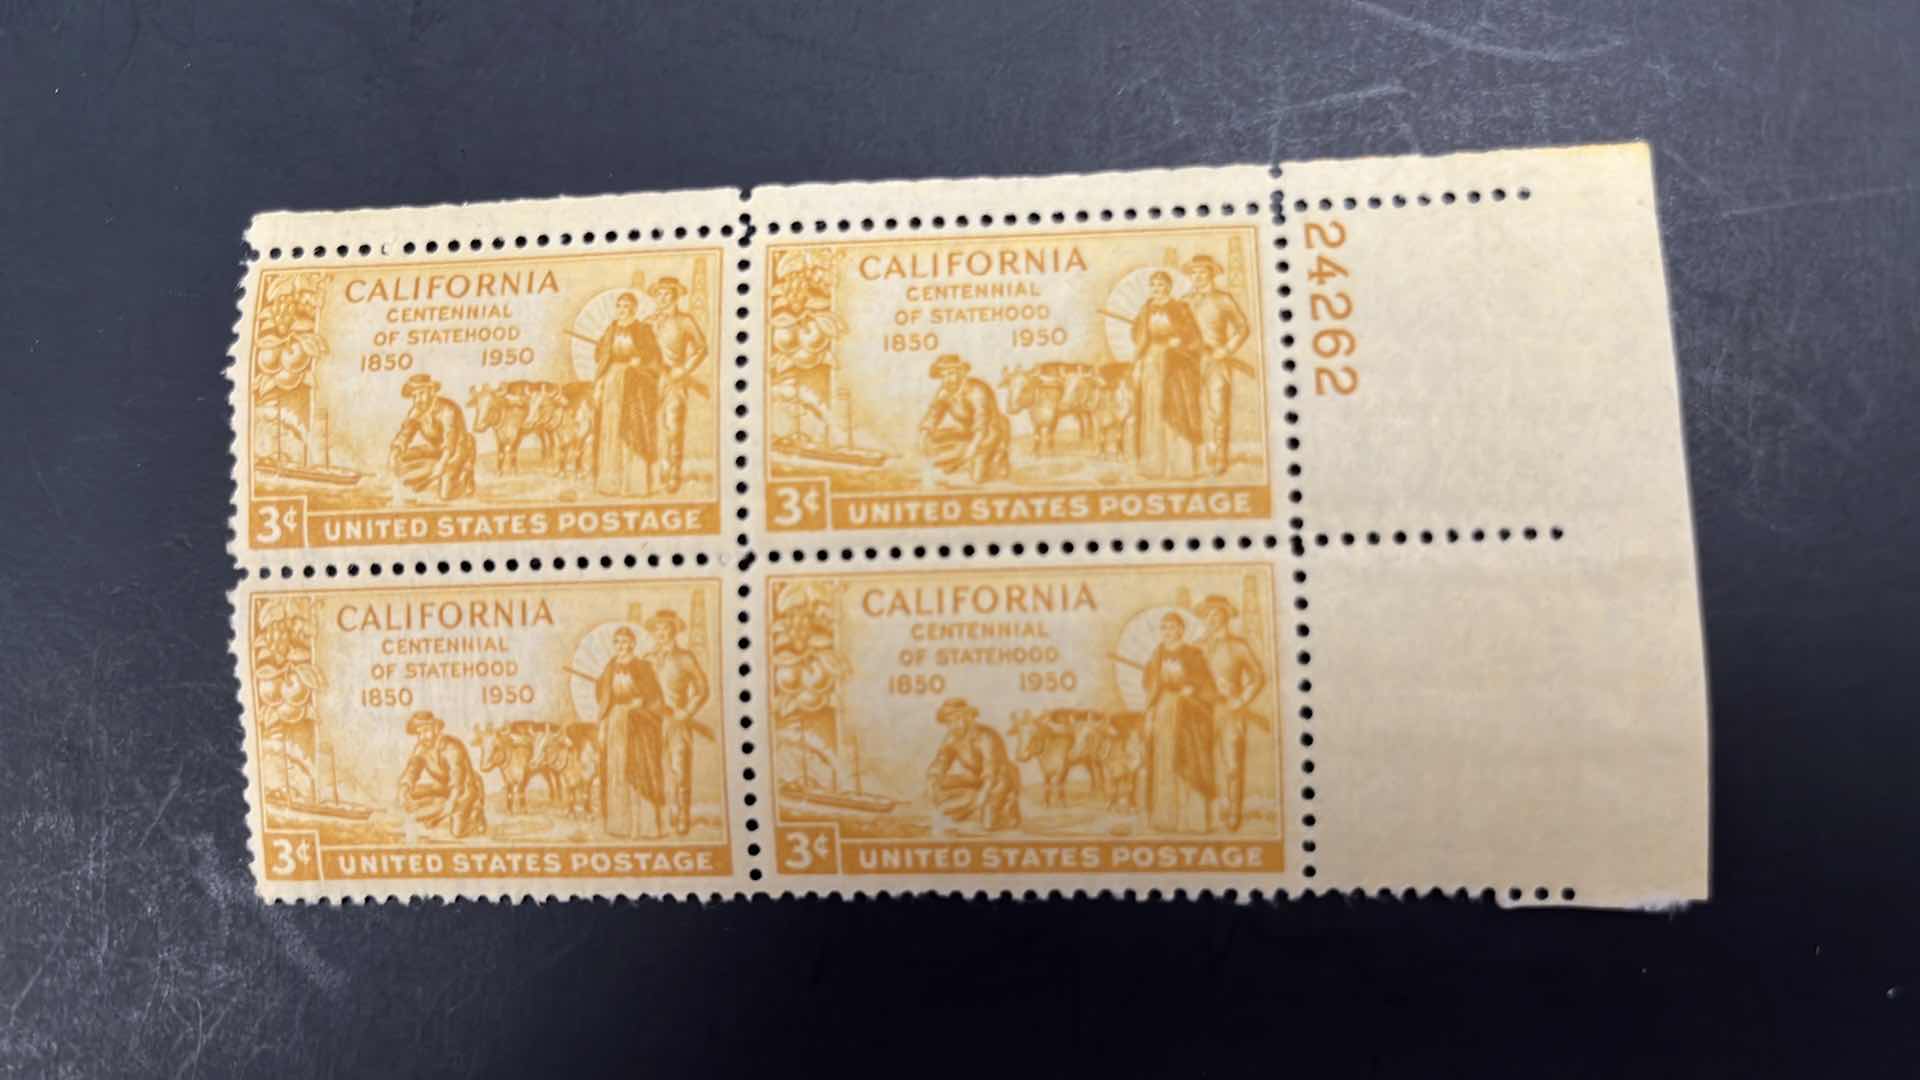 Photo 1 of STAMPS BLOCK OF 4 UNITED STATES 1950 CALIFORNIA CENTENNIAL OF STATEHOOD #997